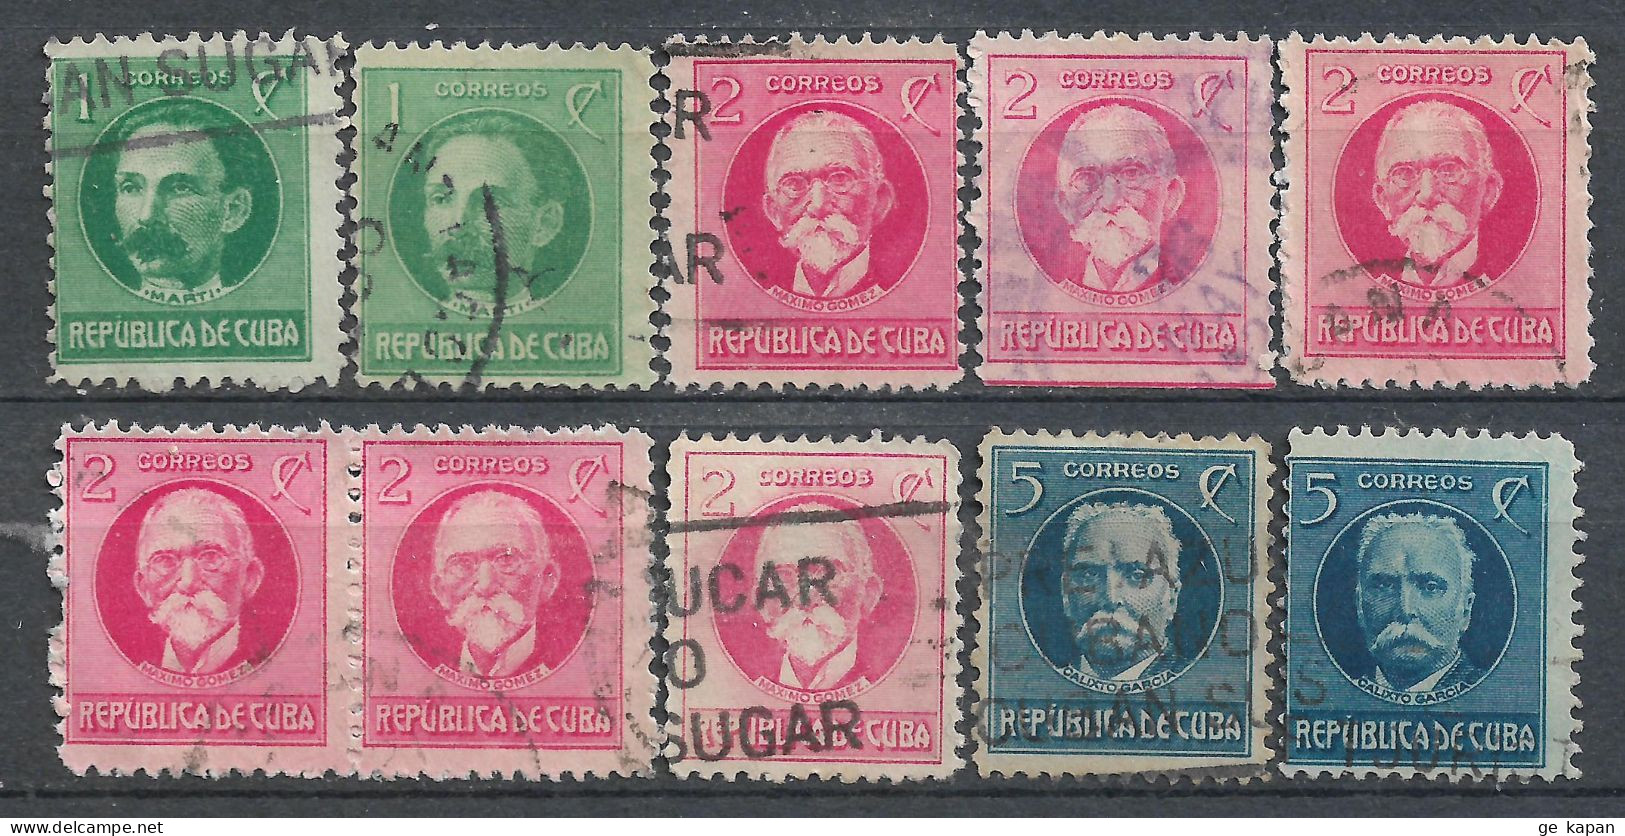 1925 CUBA Set Of 7 USED STAMPS (Michel # 48A,49A,51A) CV €2.10 - Usados